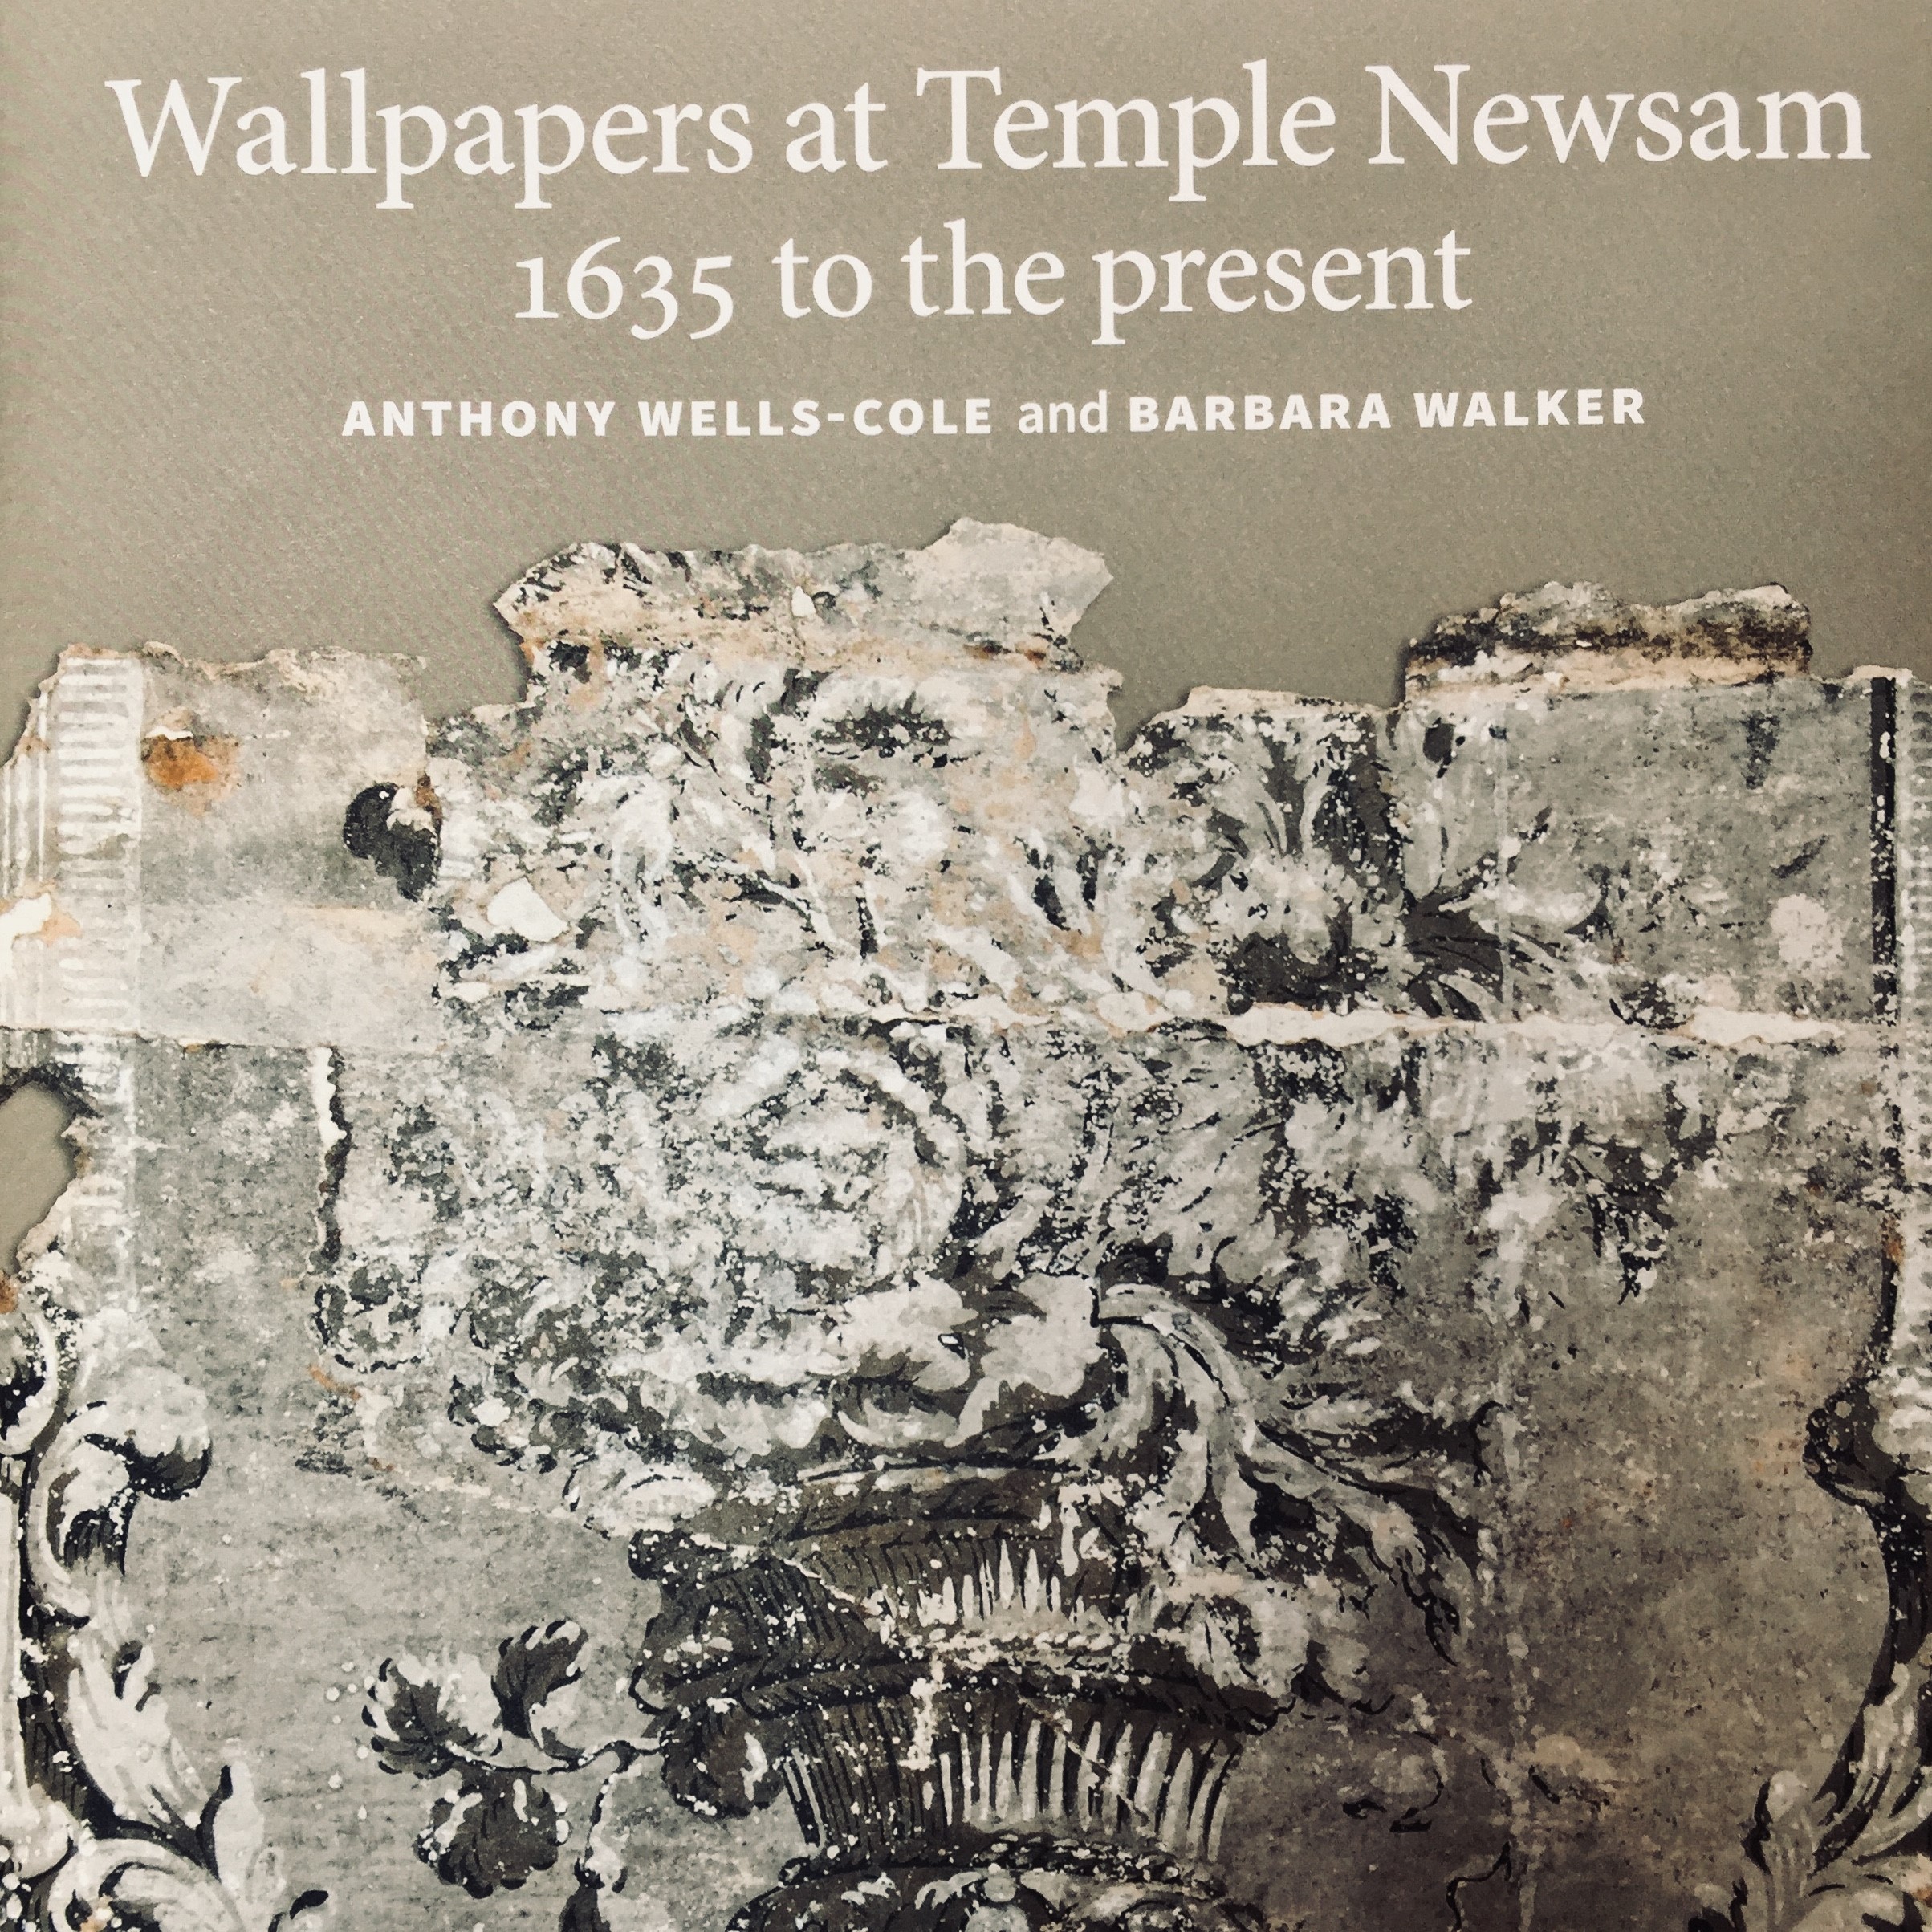 Wallpapers At Temple Newsam - Book Cover - HD Wallpaper 